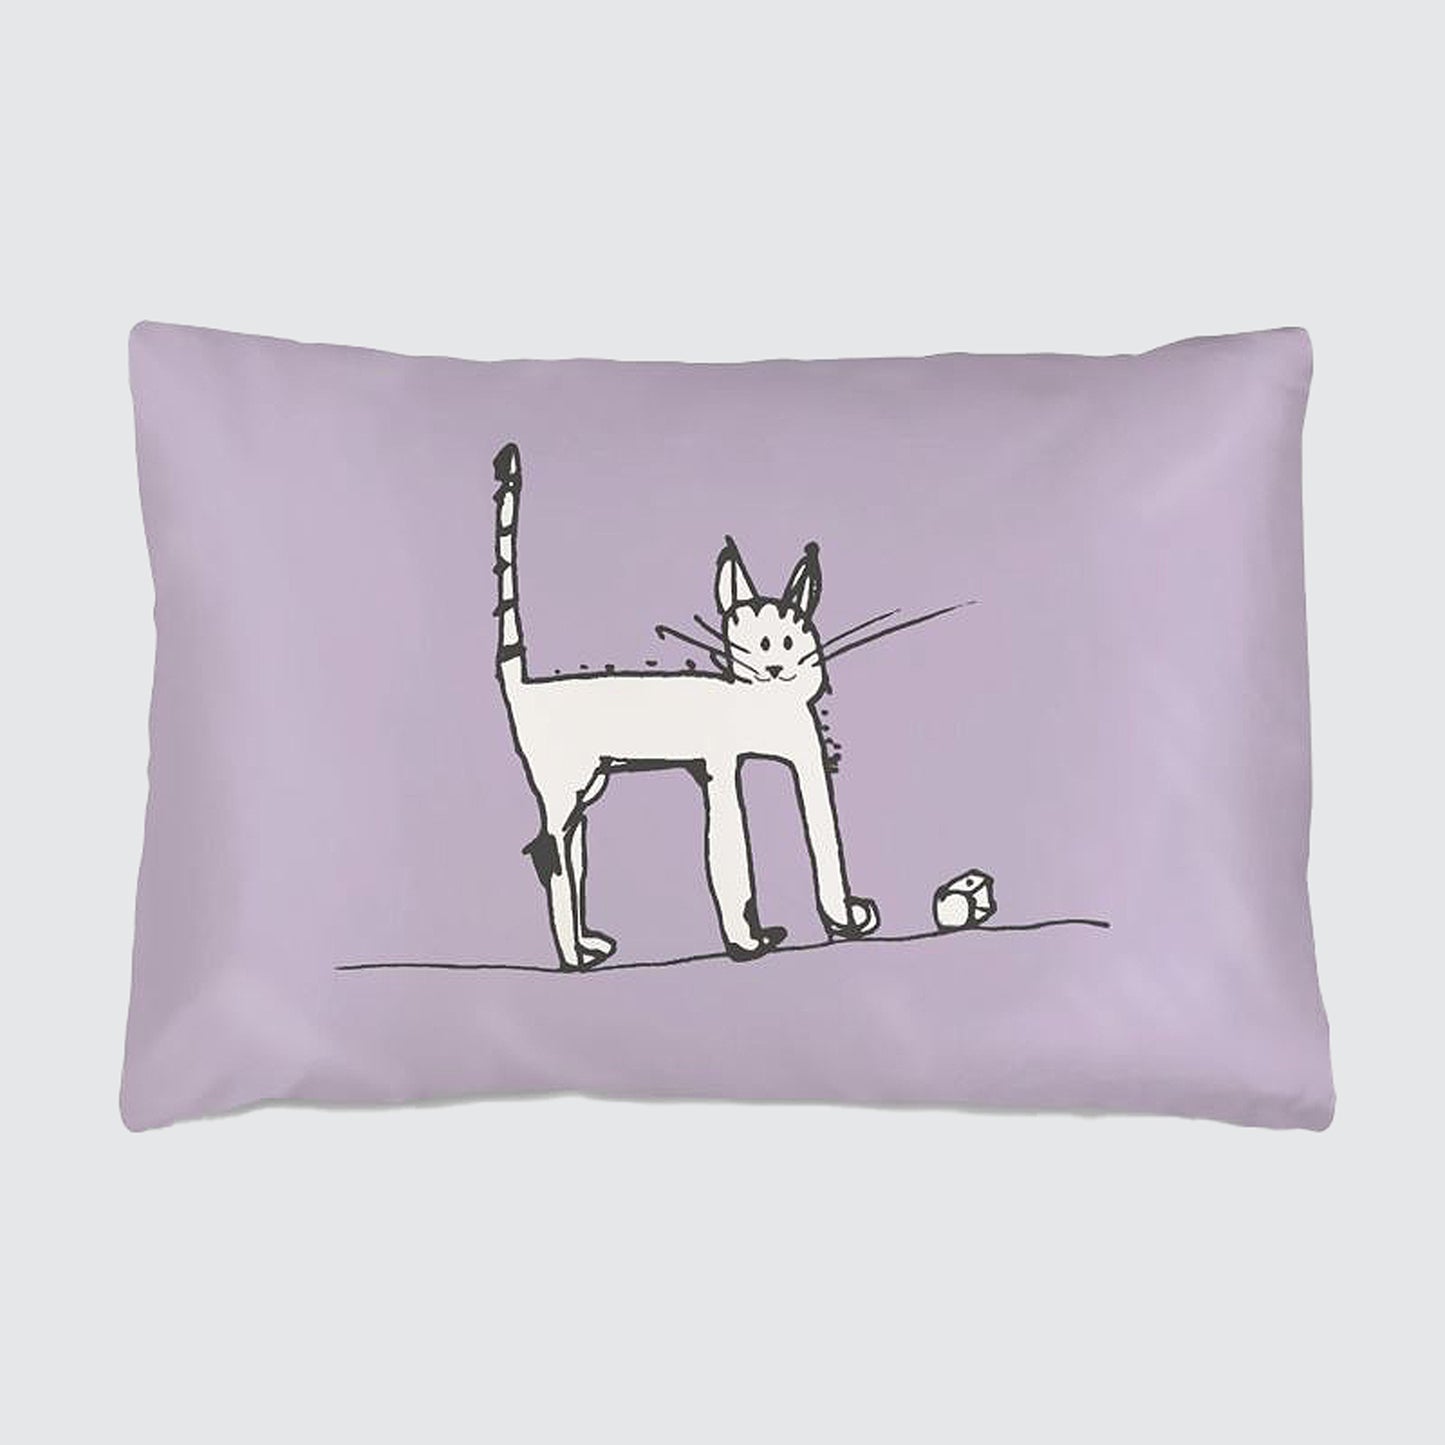 Silk Pillowcase For Children - Nills Cat With Dice